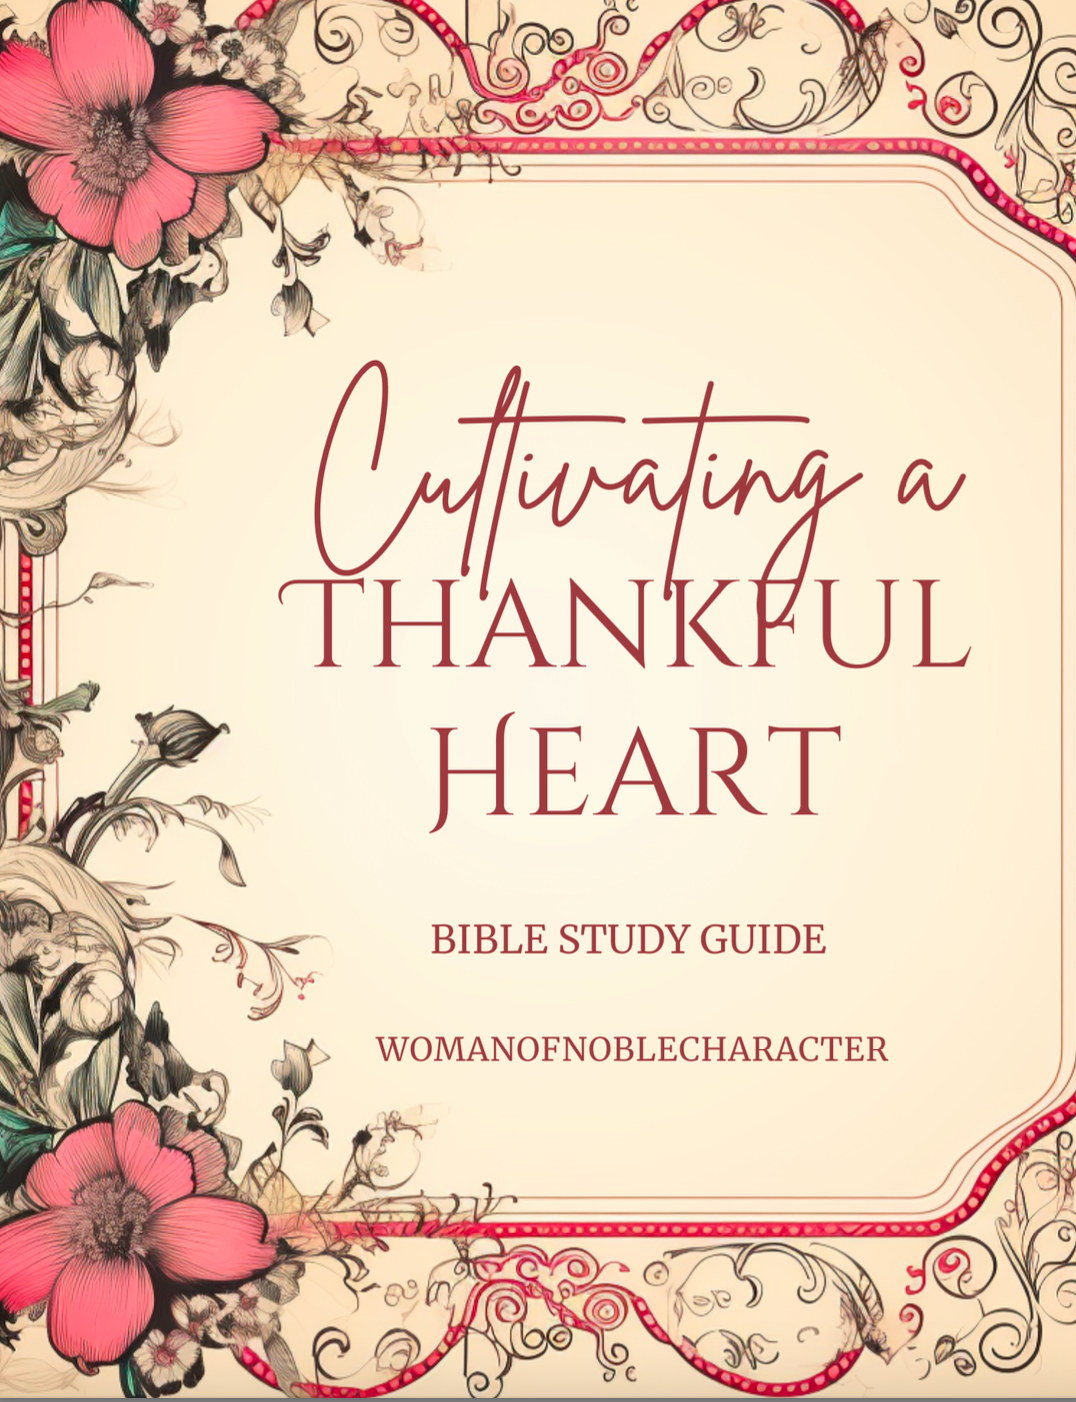 Cultivating a Thankful Heart Mini-Bible Study